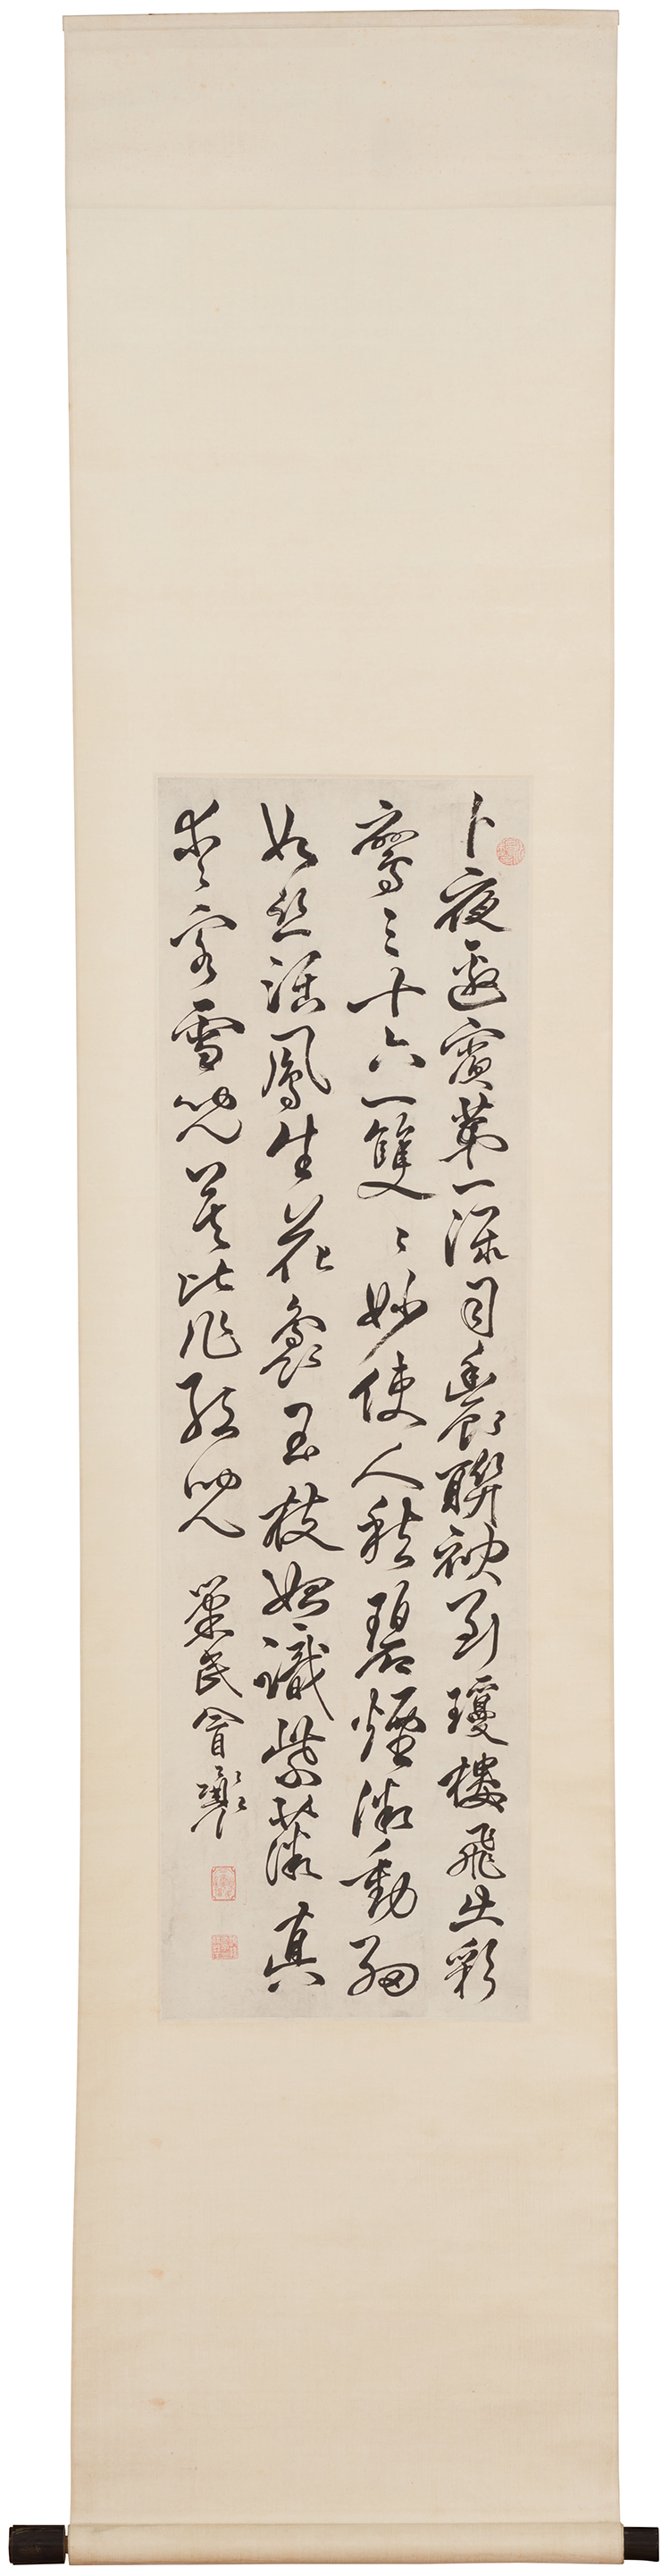 Calligraphy Scroll in Cursive Script by Attributed to Mao Xiang